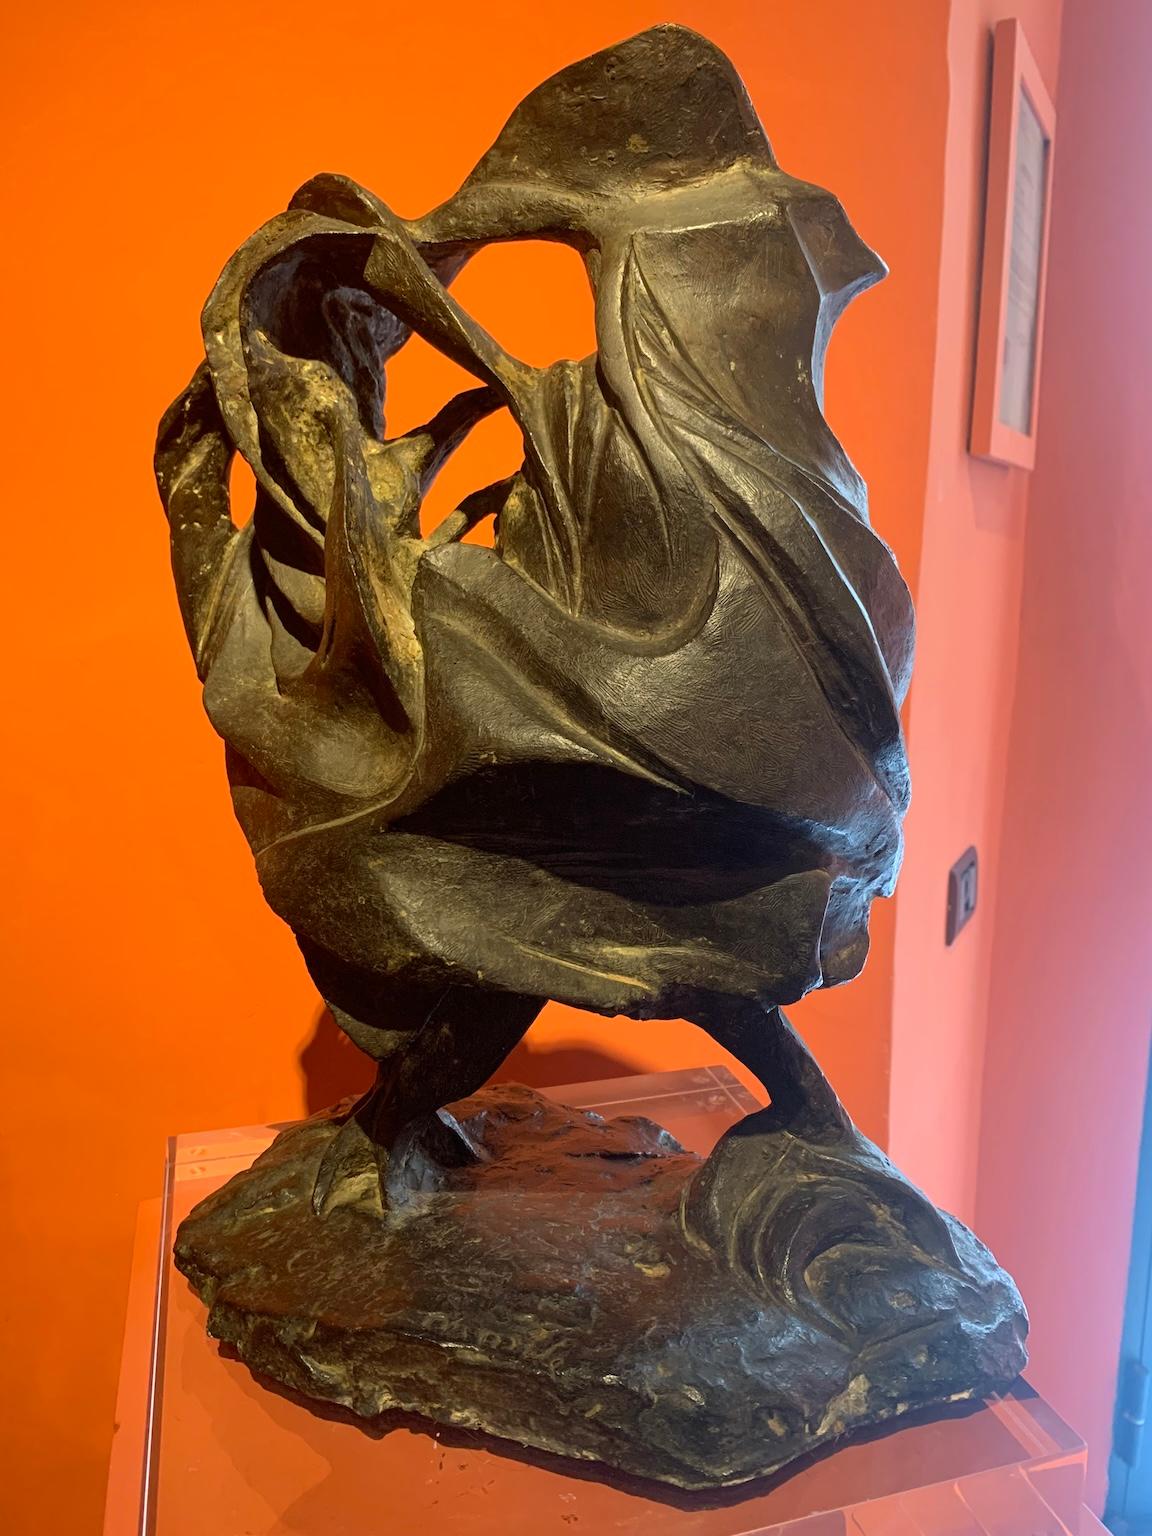 The bronze was first presented at the VII Quadriennale Nazionale d'Arte in Rome, which was held at the Palazzo delle Esposizioni from November 22, 1955 to April 30, 1956, with Fausto Pirandello as jury president, and which saw Giacomo Manzù win the